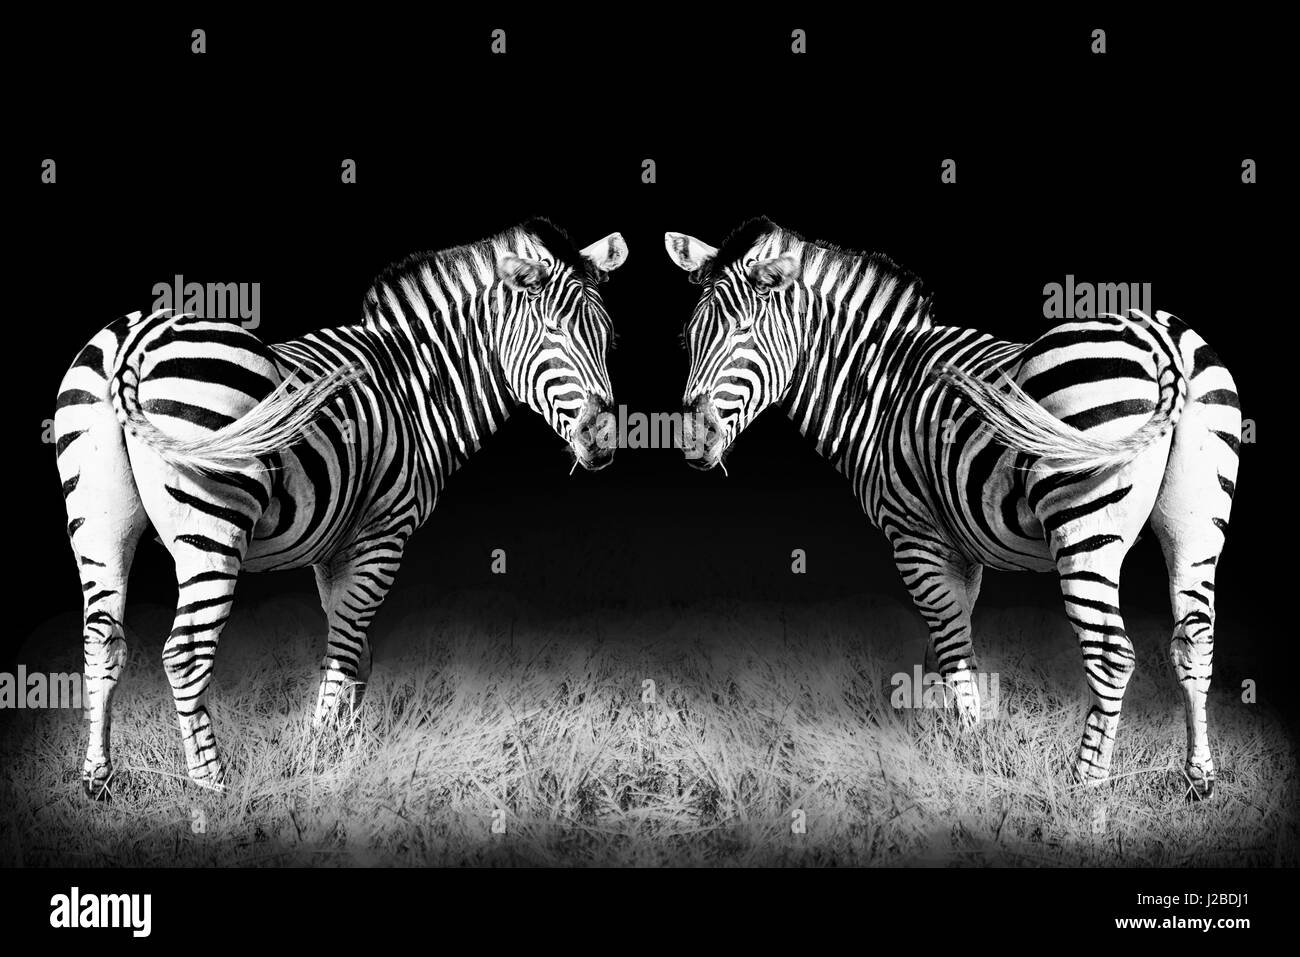 Black and white mirrored zebras (Large format sizes available) Stock Photo